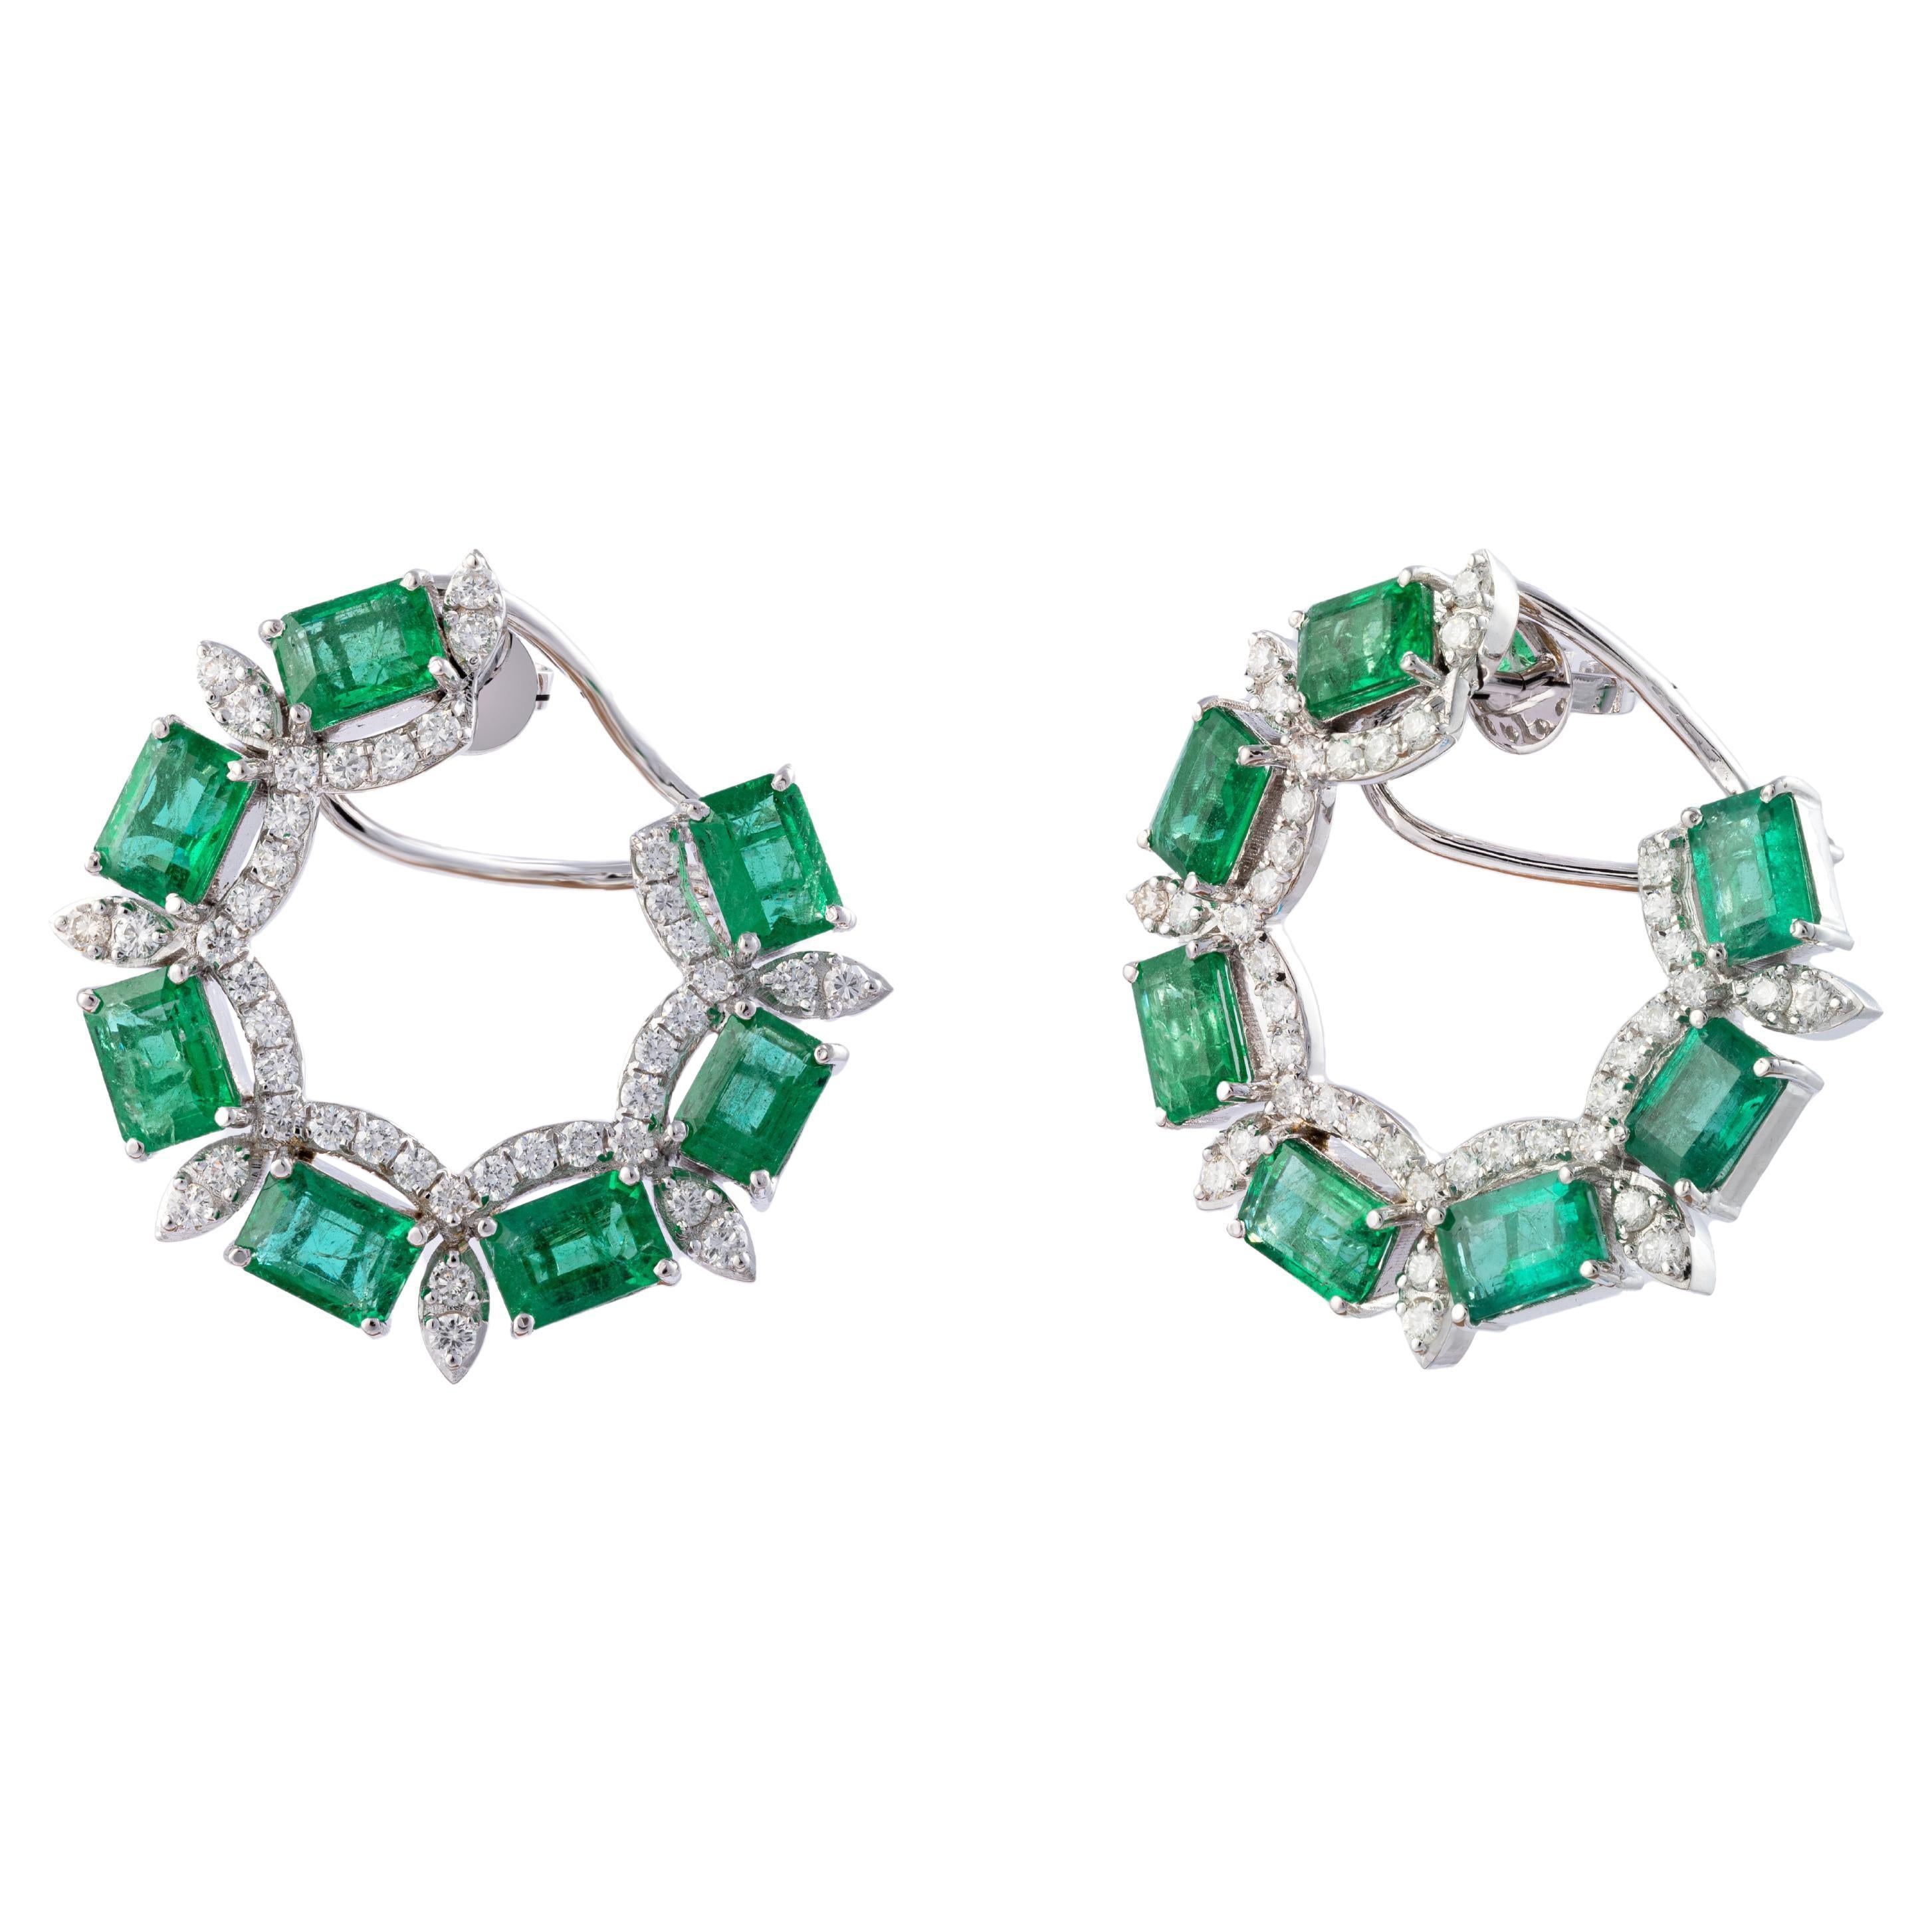 Natural Zambian Emerald 13.04 Cts & 2.25 Cts Diamond Earring in 14k Gold